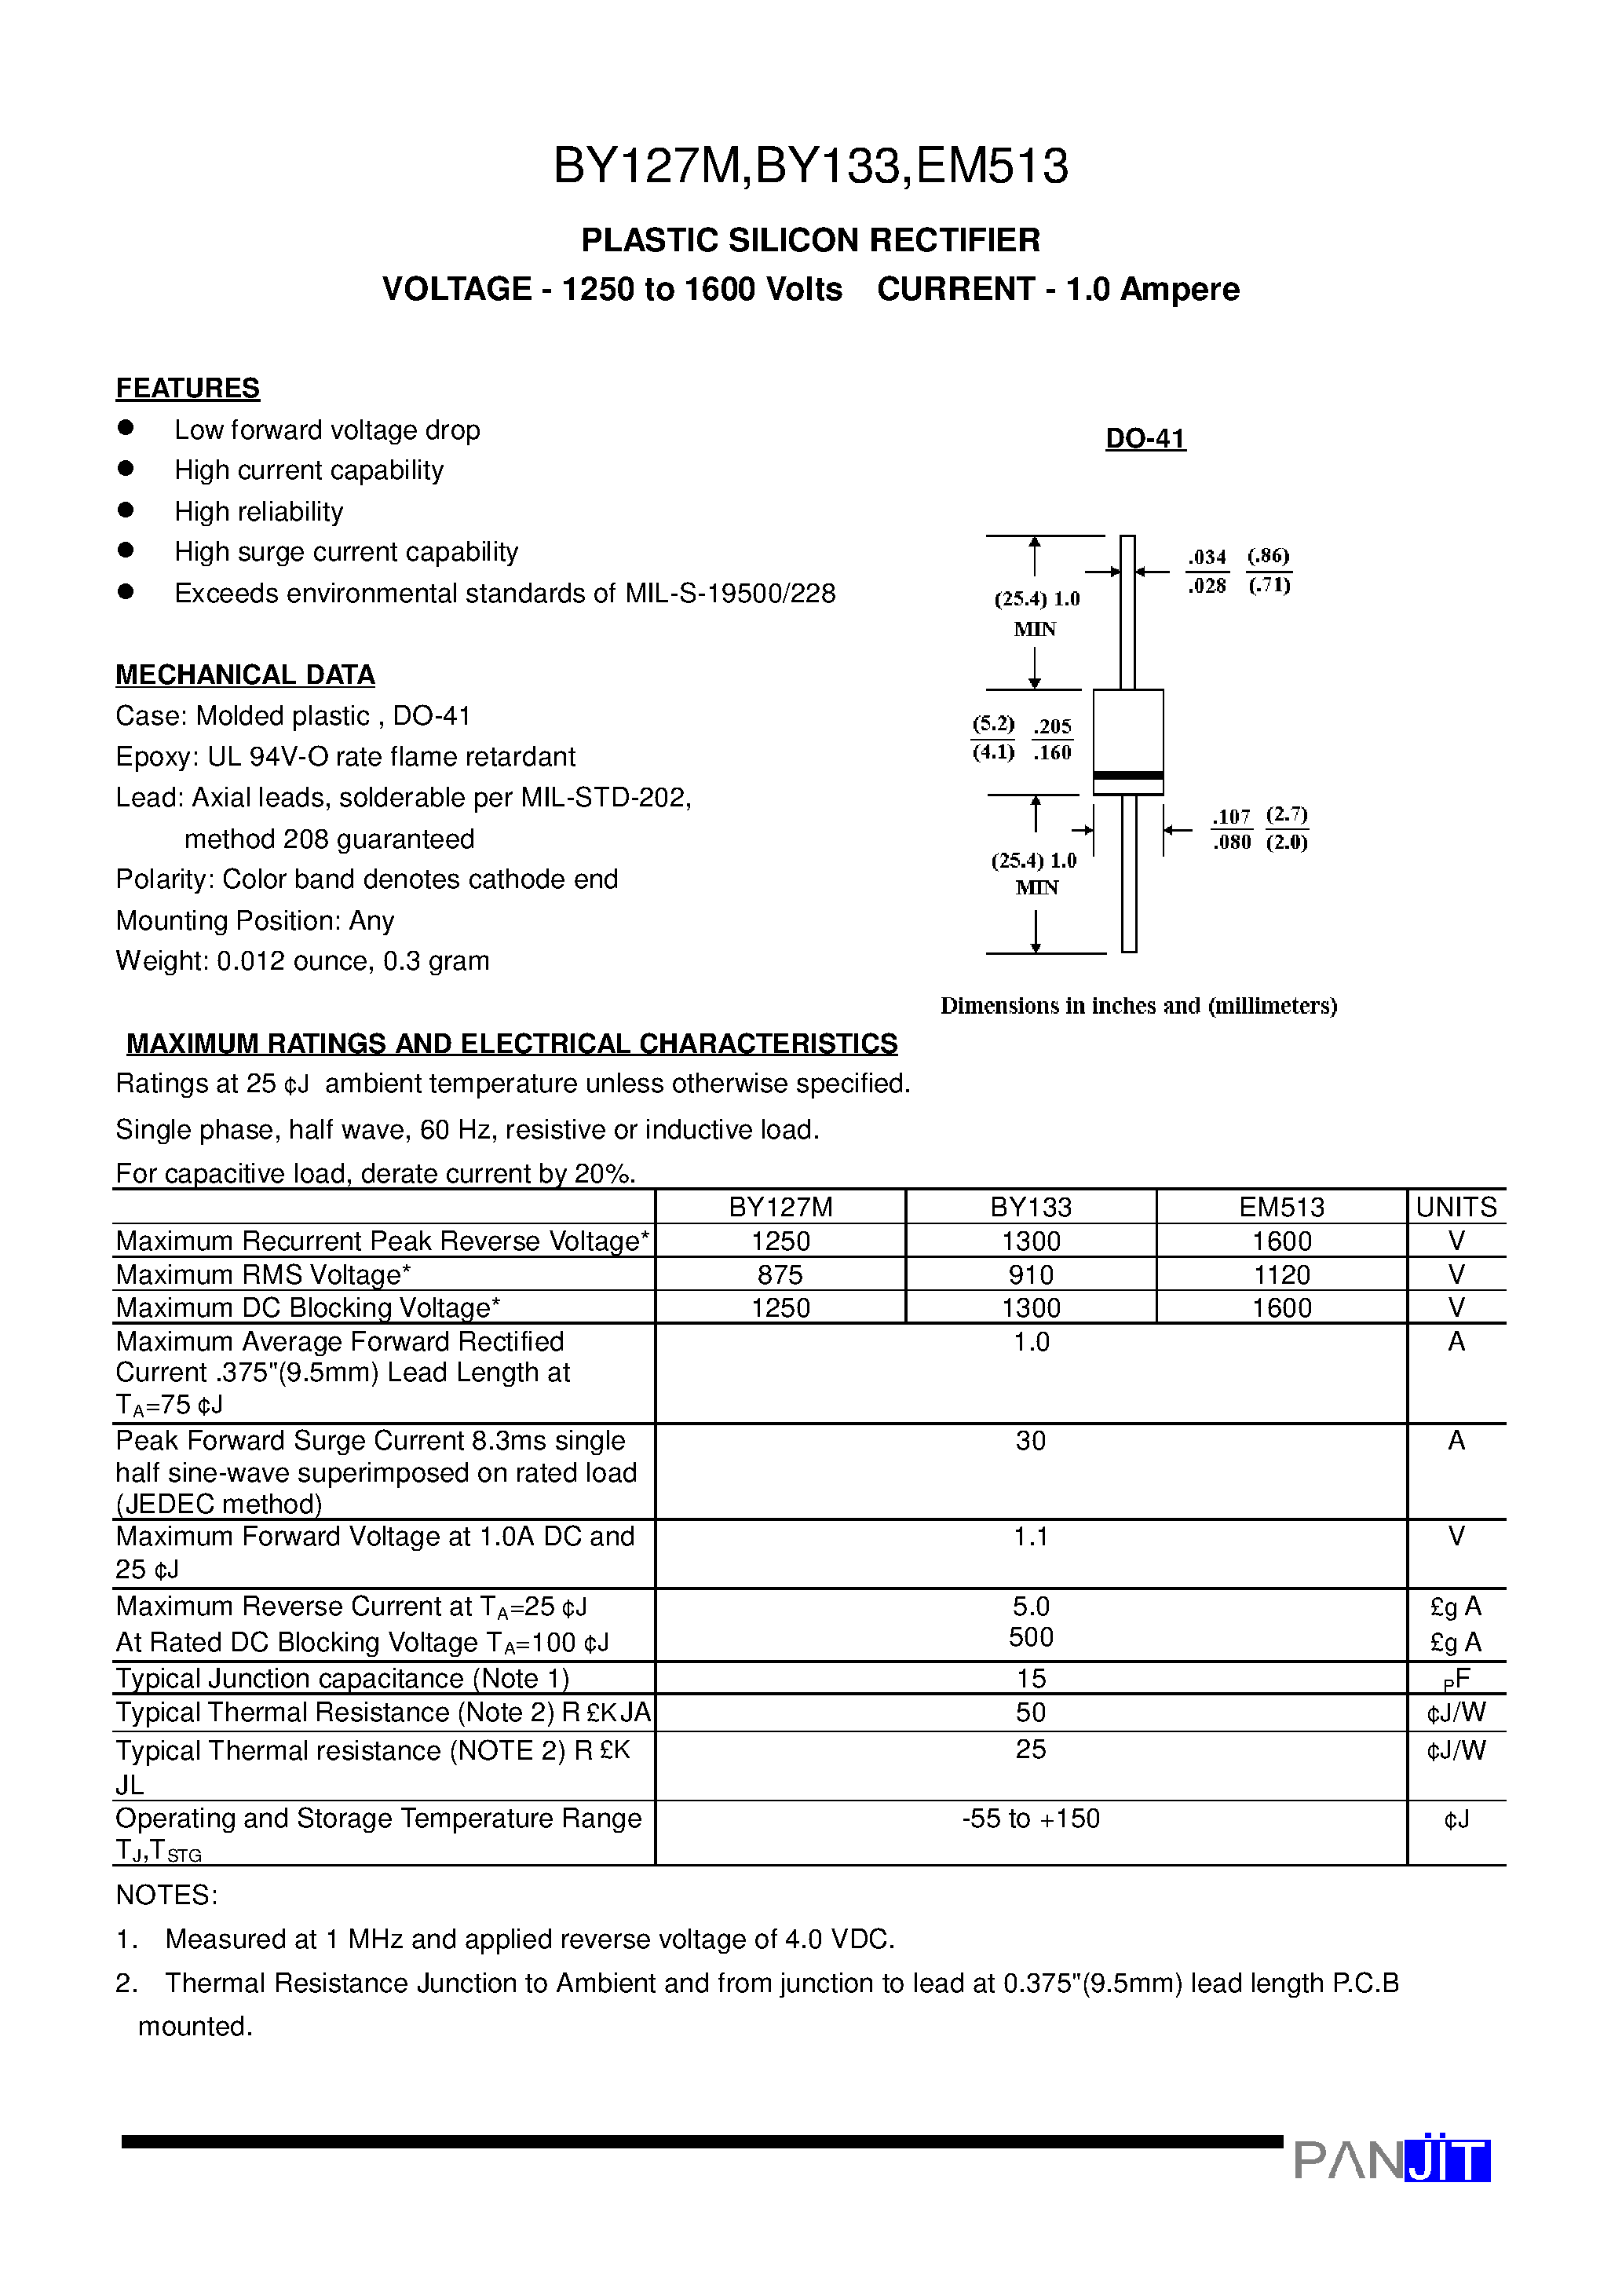 Datasheet BY133 - PLASTIC SILICON RECTIFIER(VOLTAGE - 1250 to 1600 Volts CURRENT - 1.0 Ampere) page 1